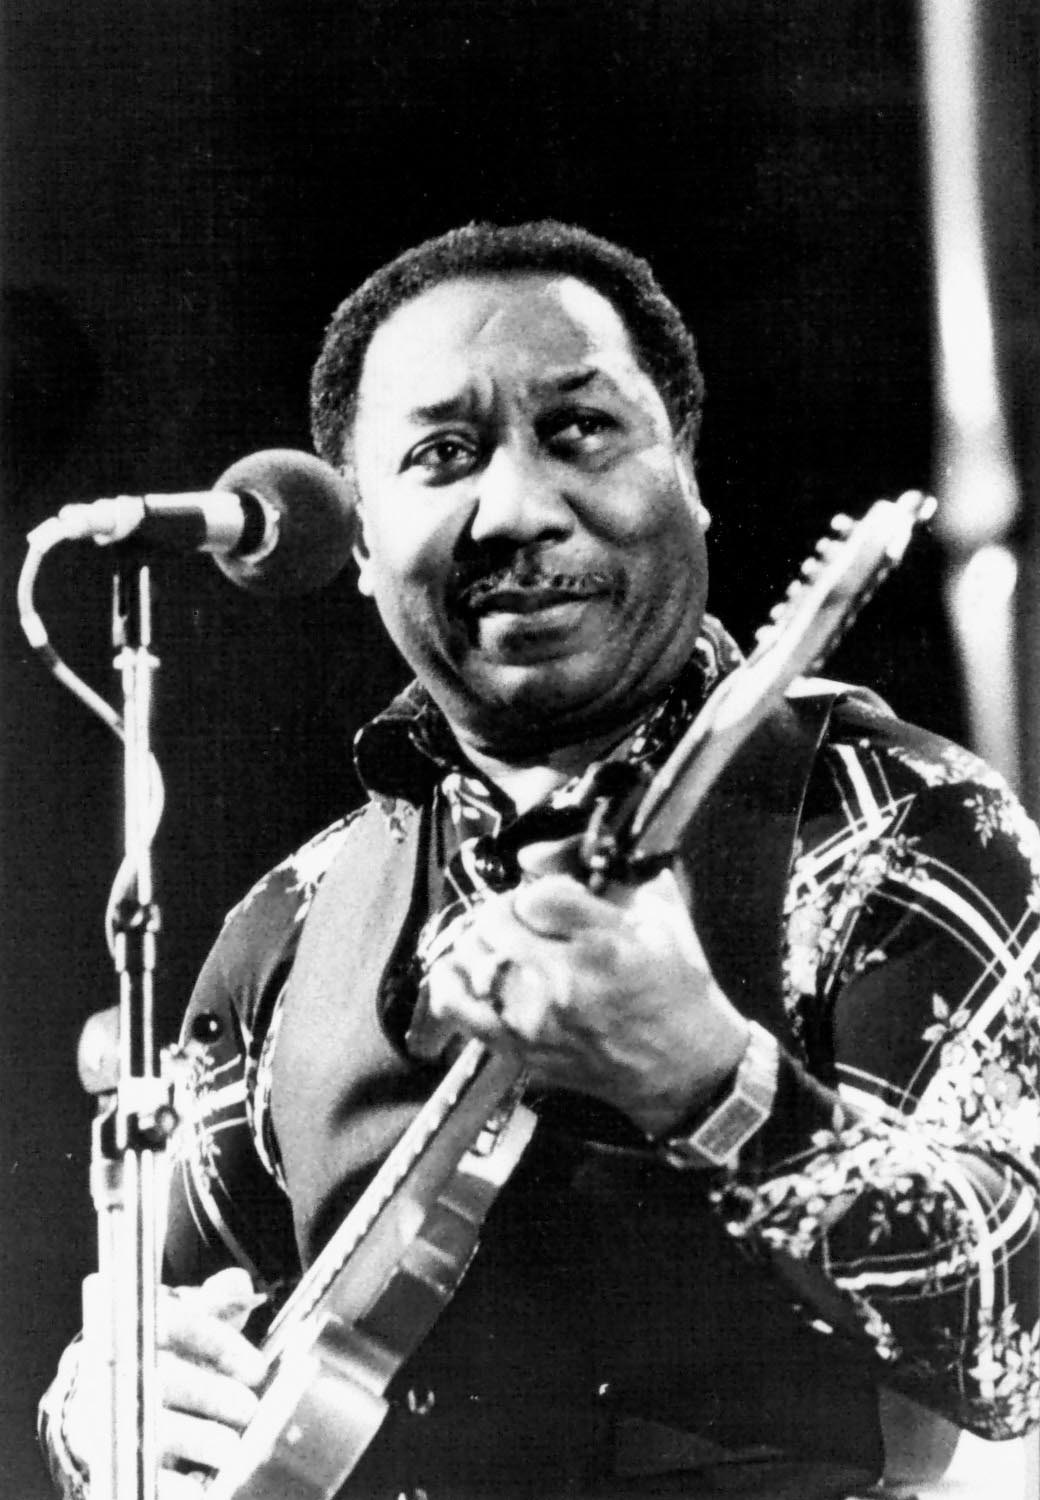 Muddy Waters at microphone strums an electric guitar.